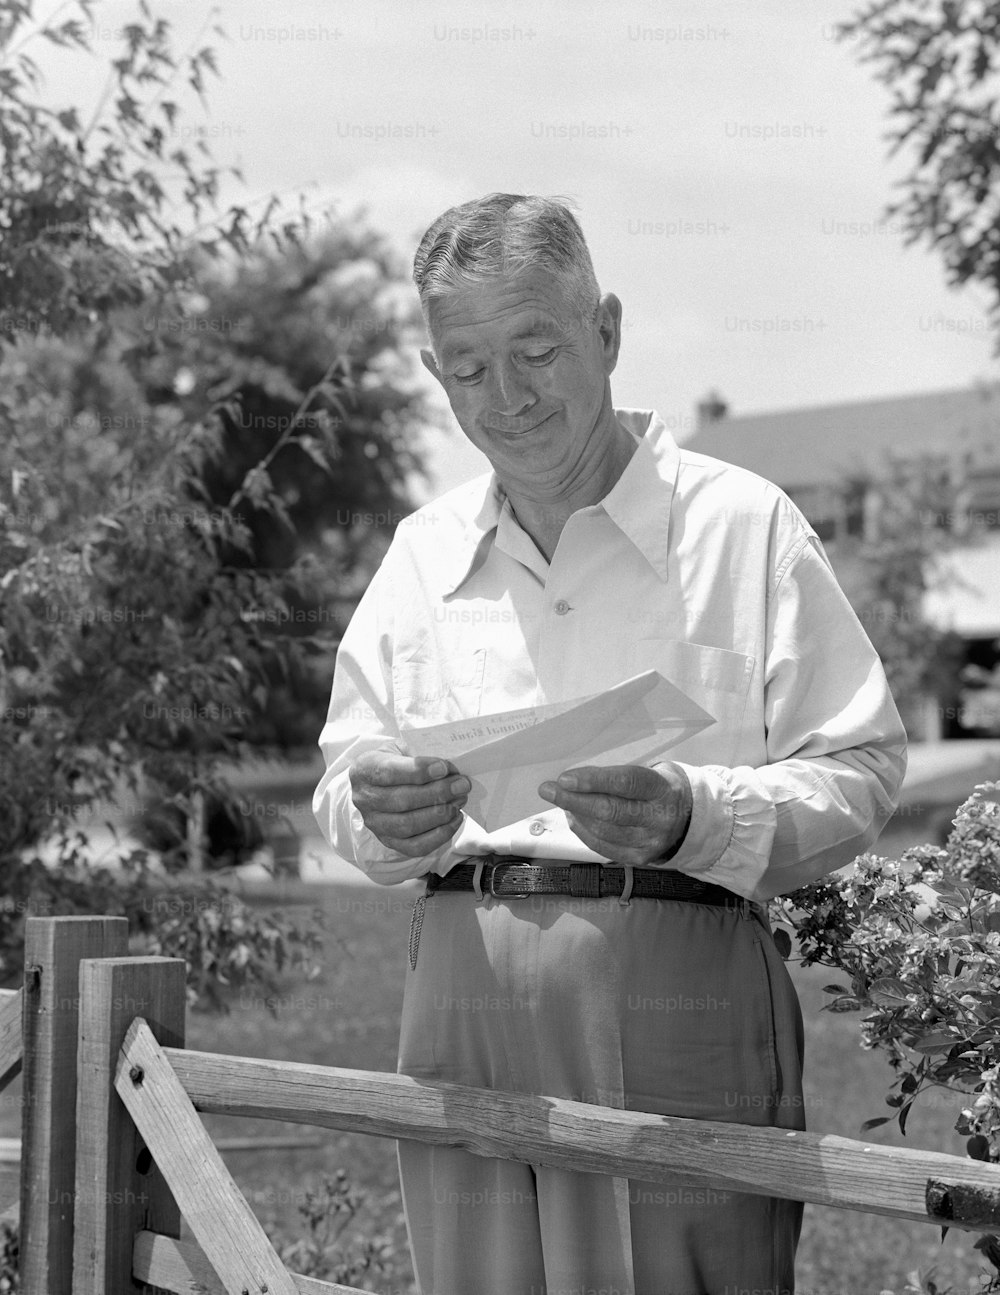 UNITED STATES - CIRCA 1950s:  Elderly man standing by fence in yard, opening envelope and taking out cheque.